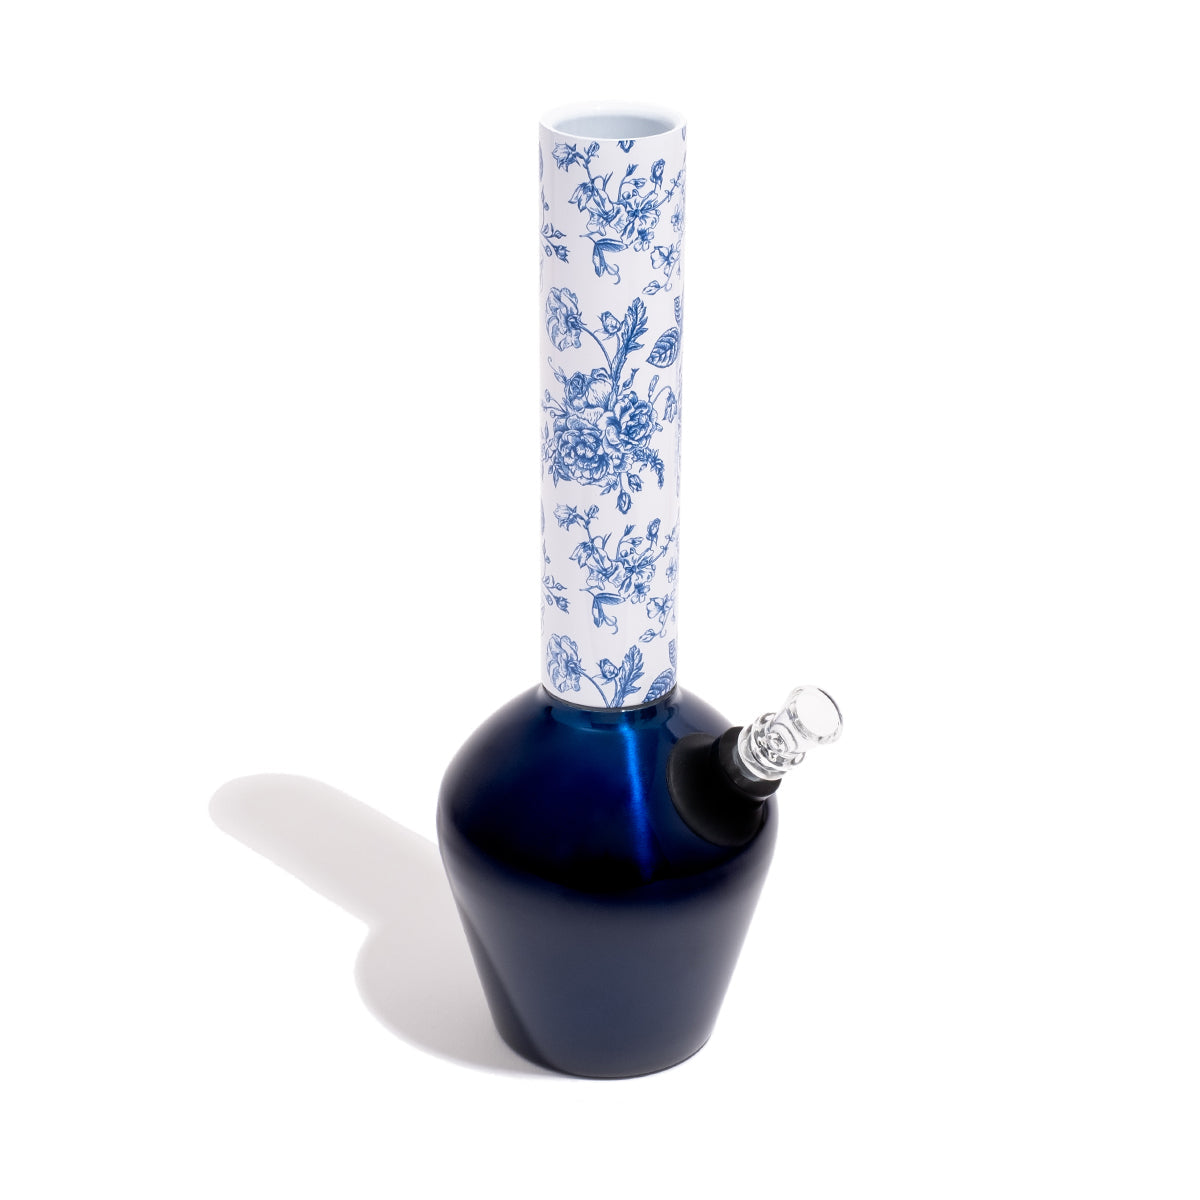 Chill Steel Pipes Mix & Match Series bong with a glossy blue base and floral pattern tube, angled view